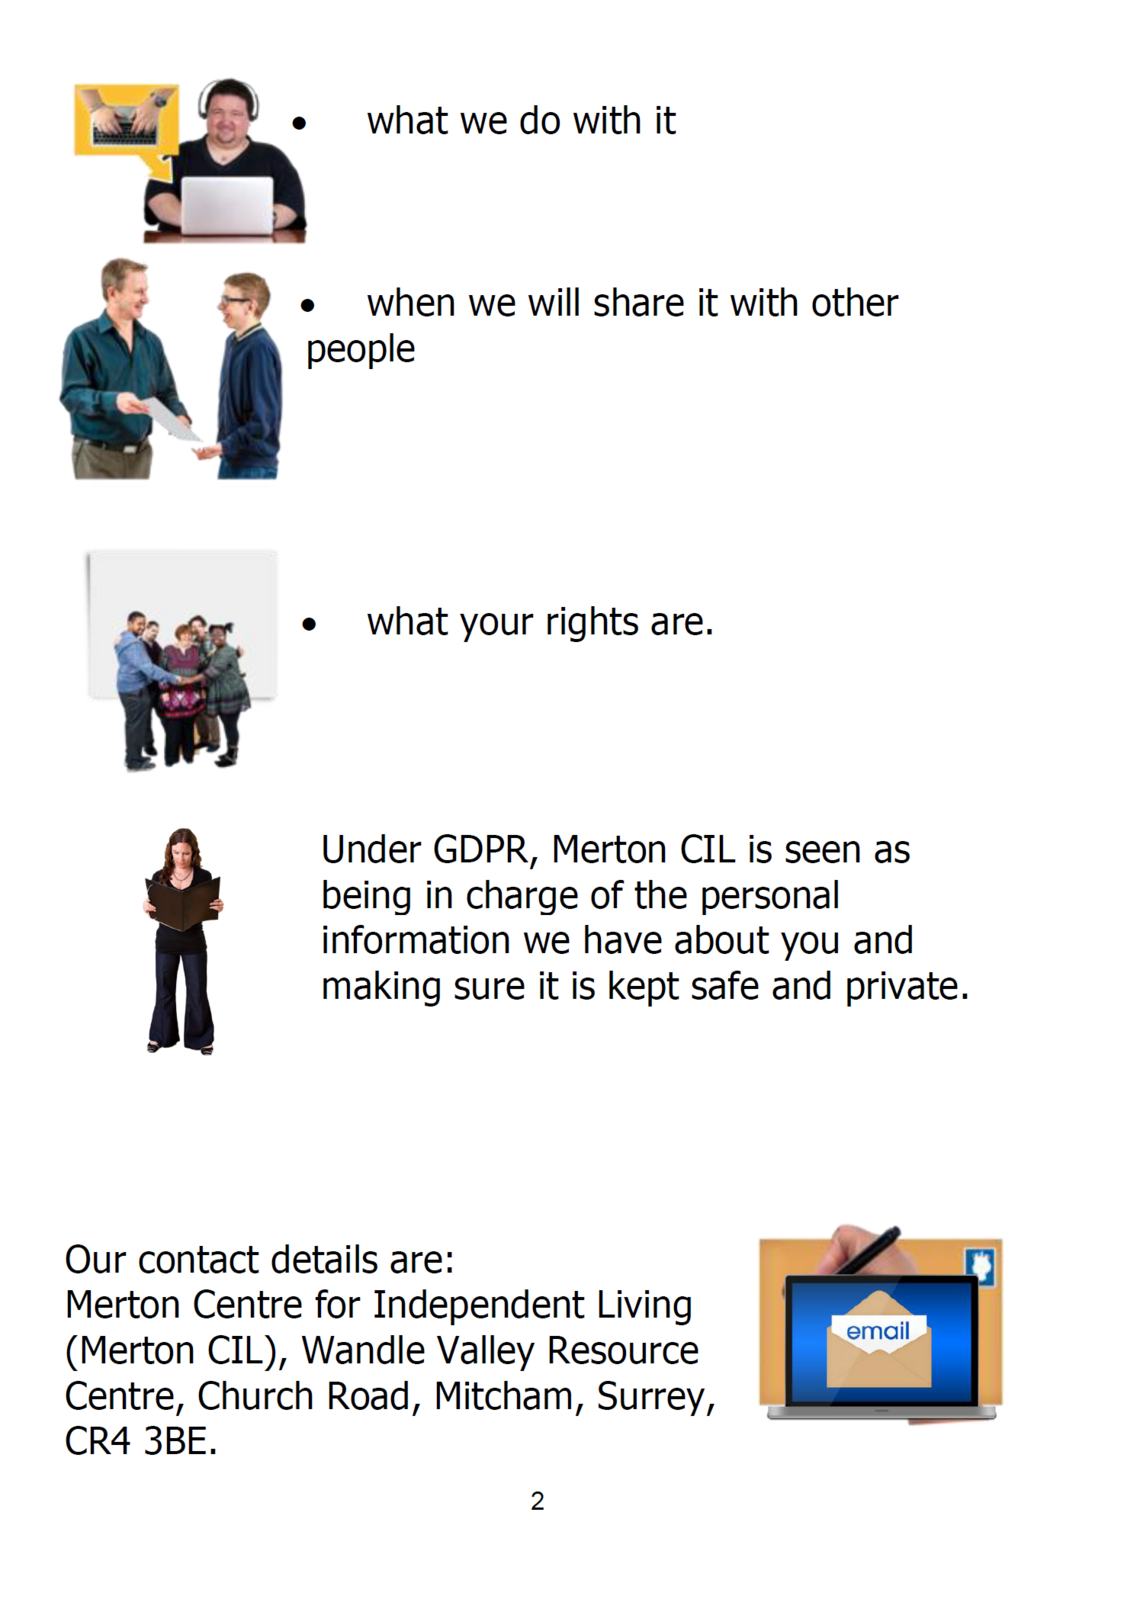 •	what we do with it    •	when we will share it with other people       •	what your rights are.      Under GDPR, Merton CIL is seen as being in charge of the personal information we have about you and making sure it is kept safe and private.      Our contact details are: Merton Centre for Independent Living (Merton CIL), Wandle Valley Resource Centre, Church Road, Mitcham, Surrey, CR4 3BE.